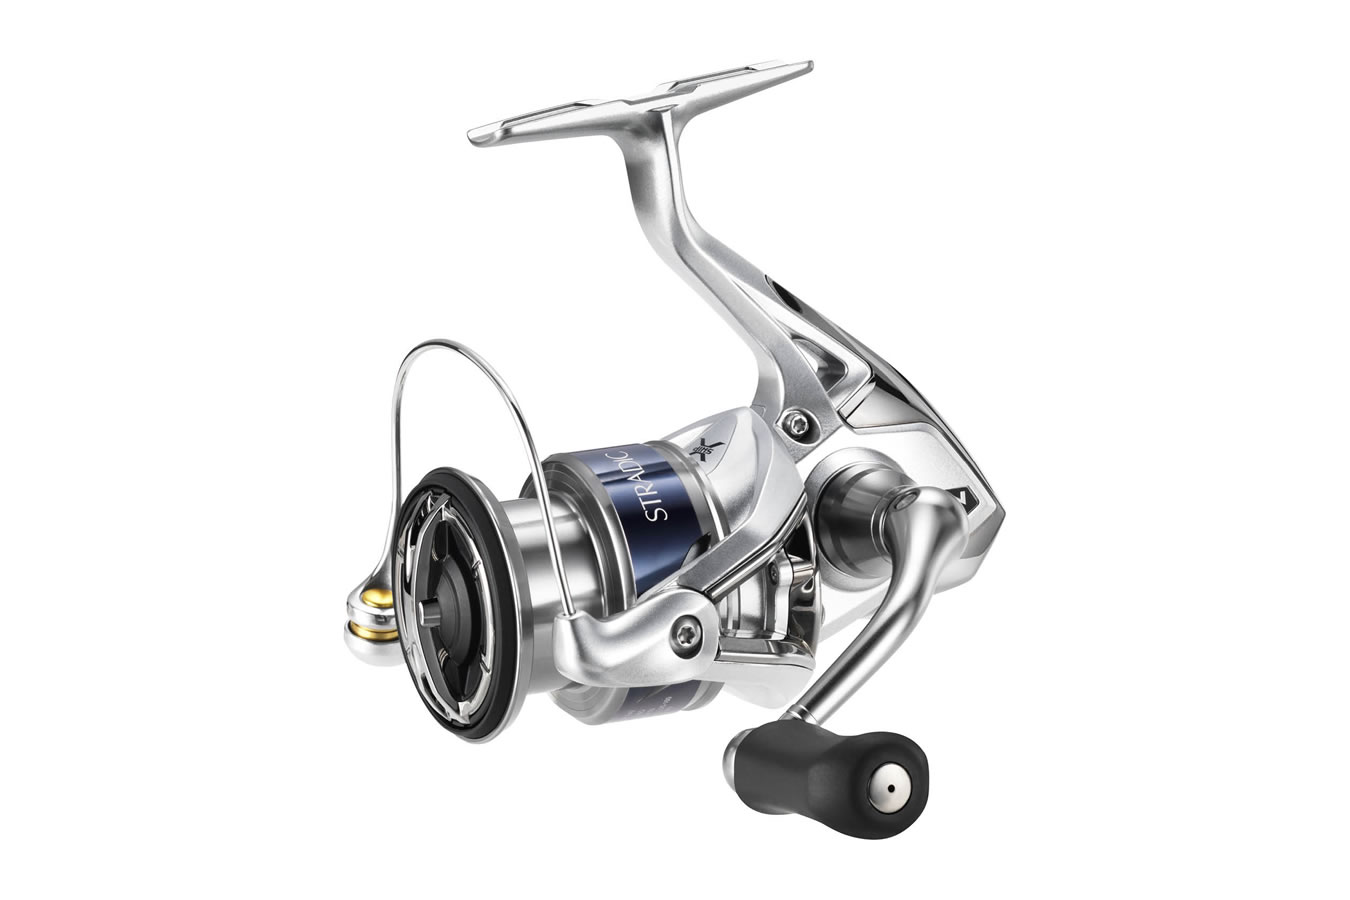 Discount Shimano Stradic 1000 - Spinning Reel (6.0:1) for Sale